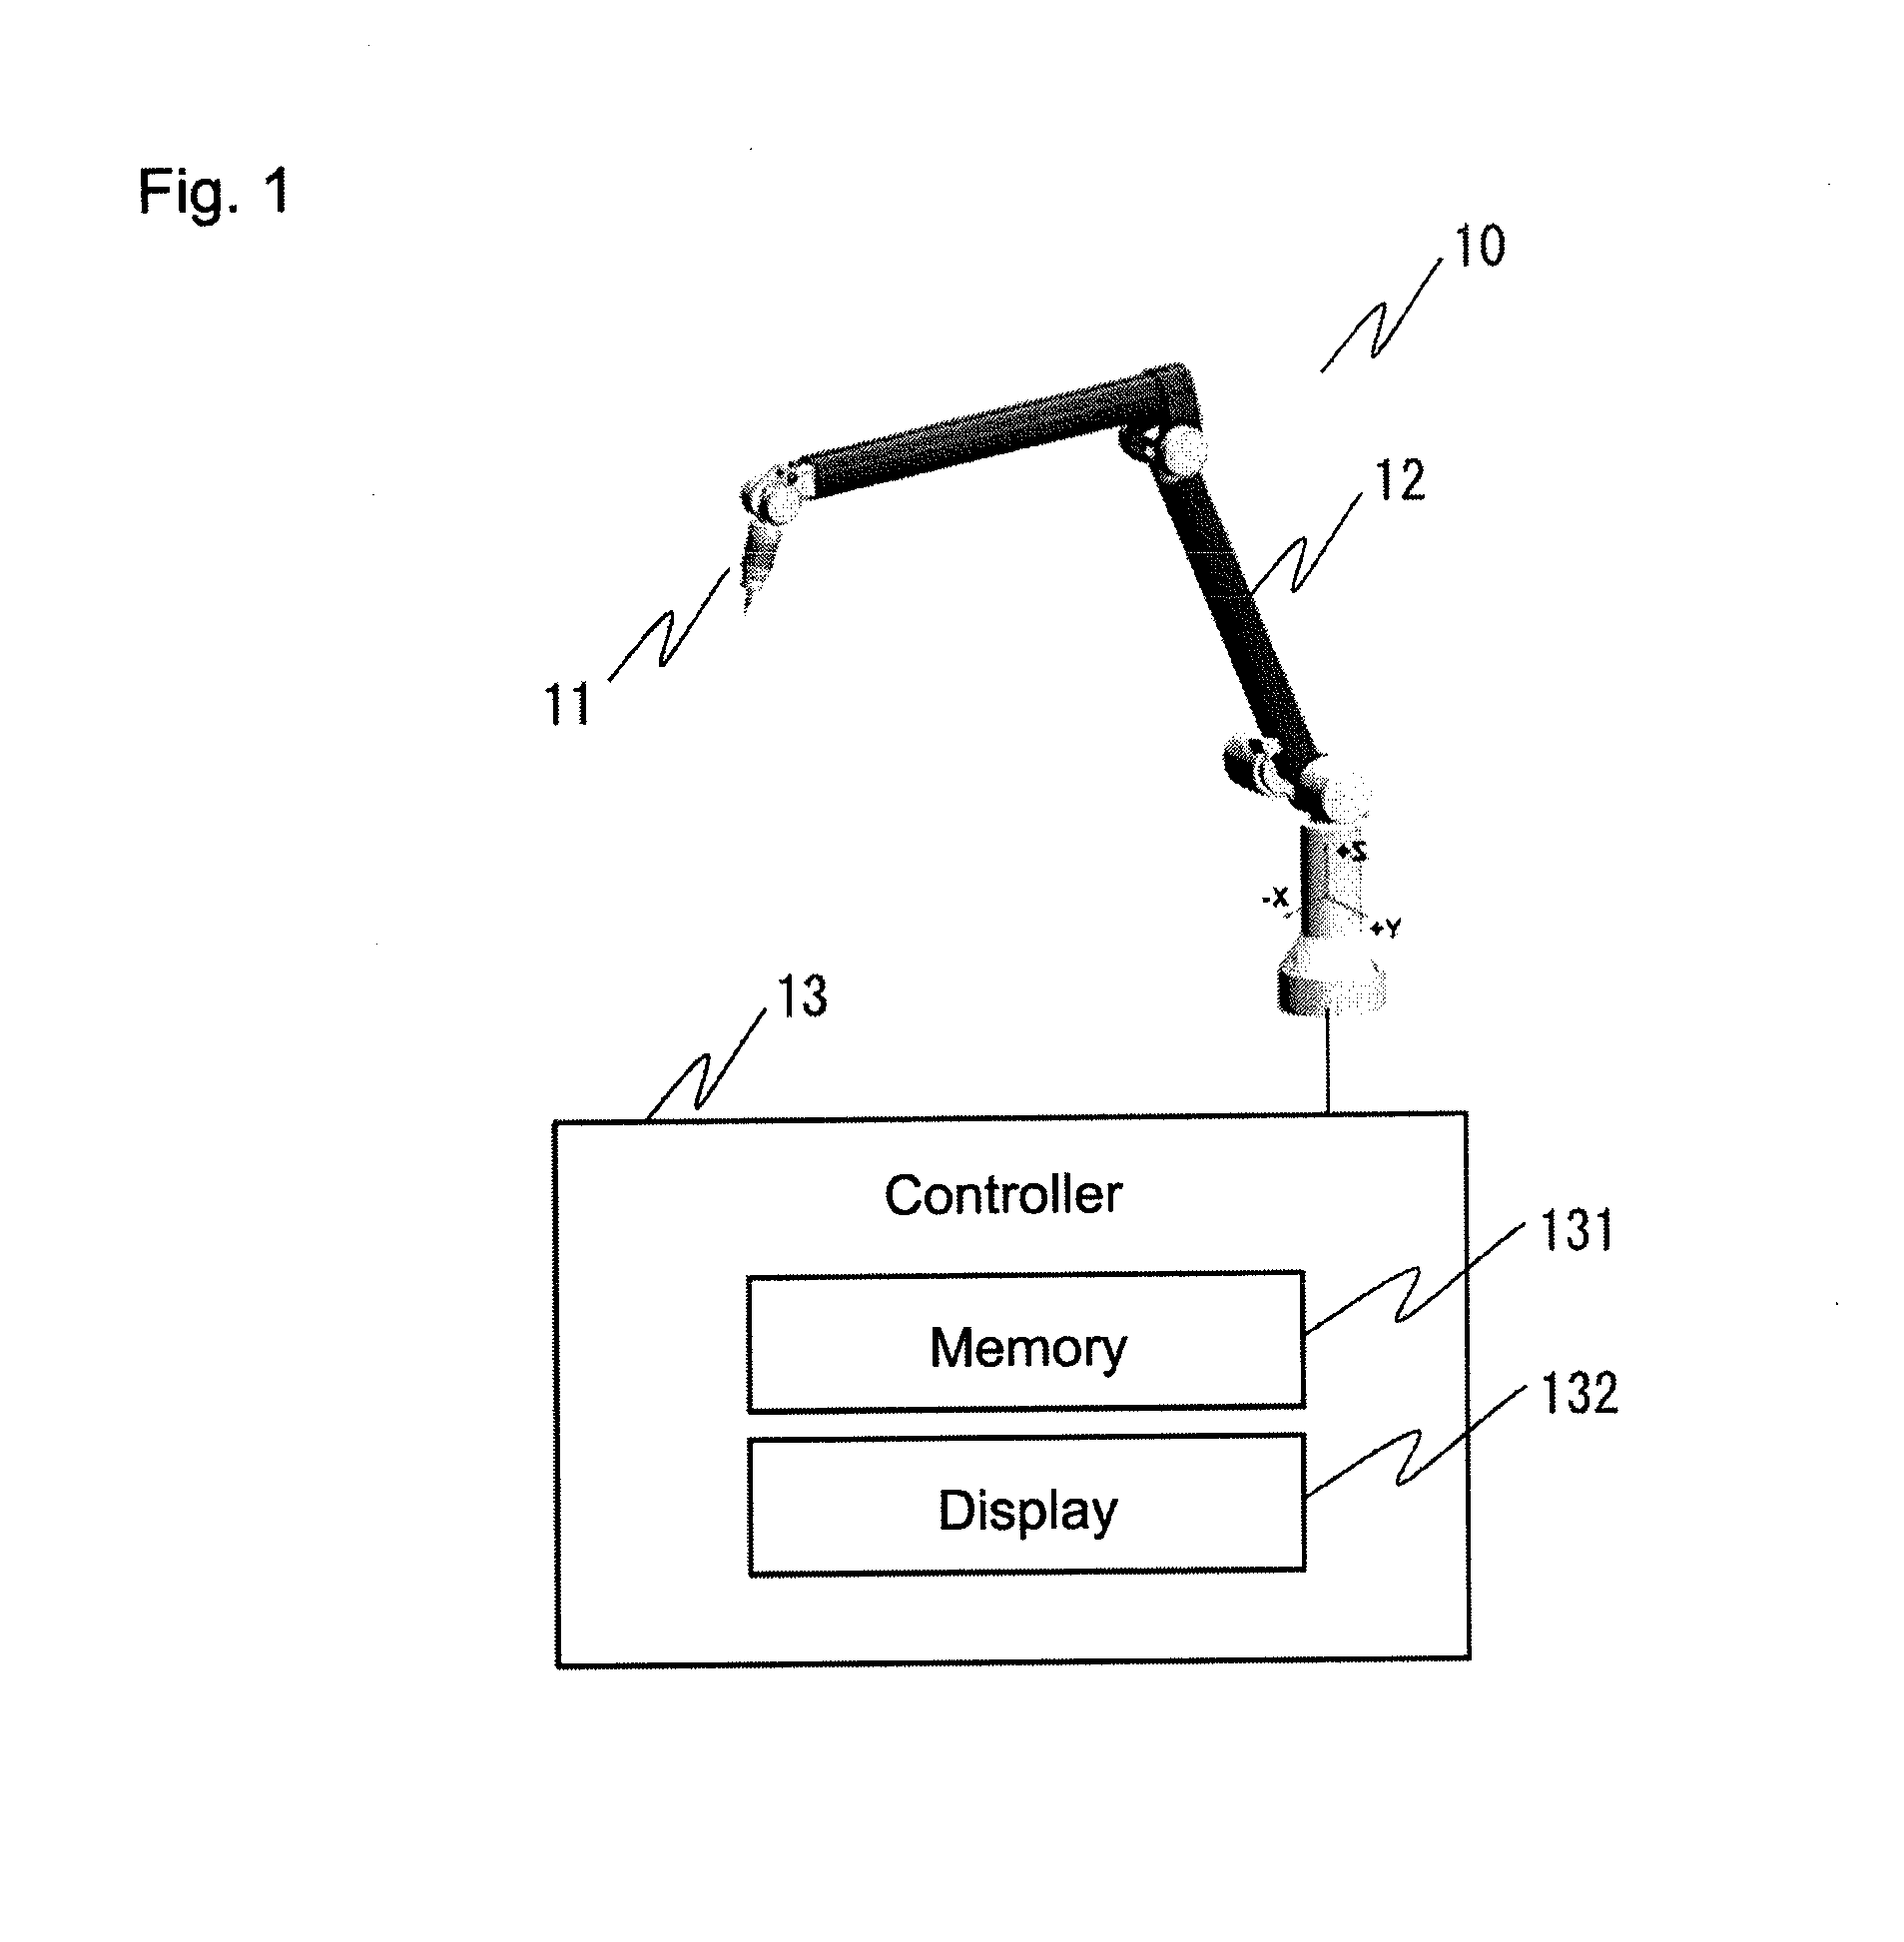 Method and program for using gestures to control a coordinate measuring device